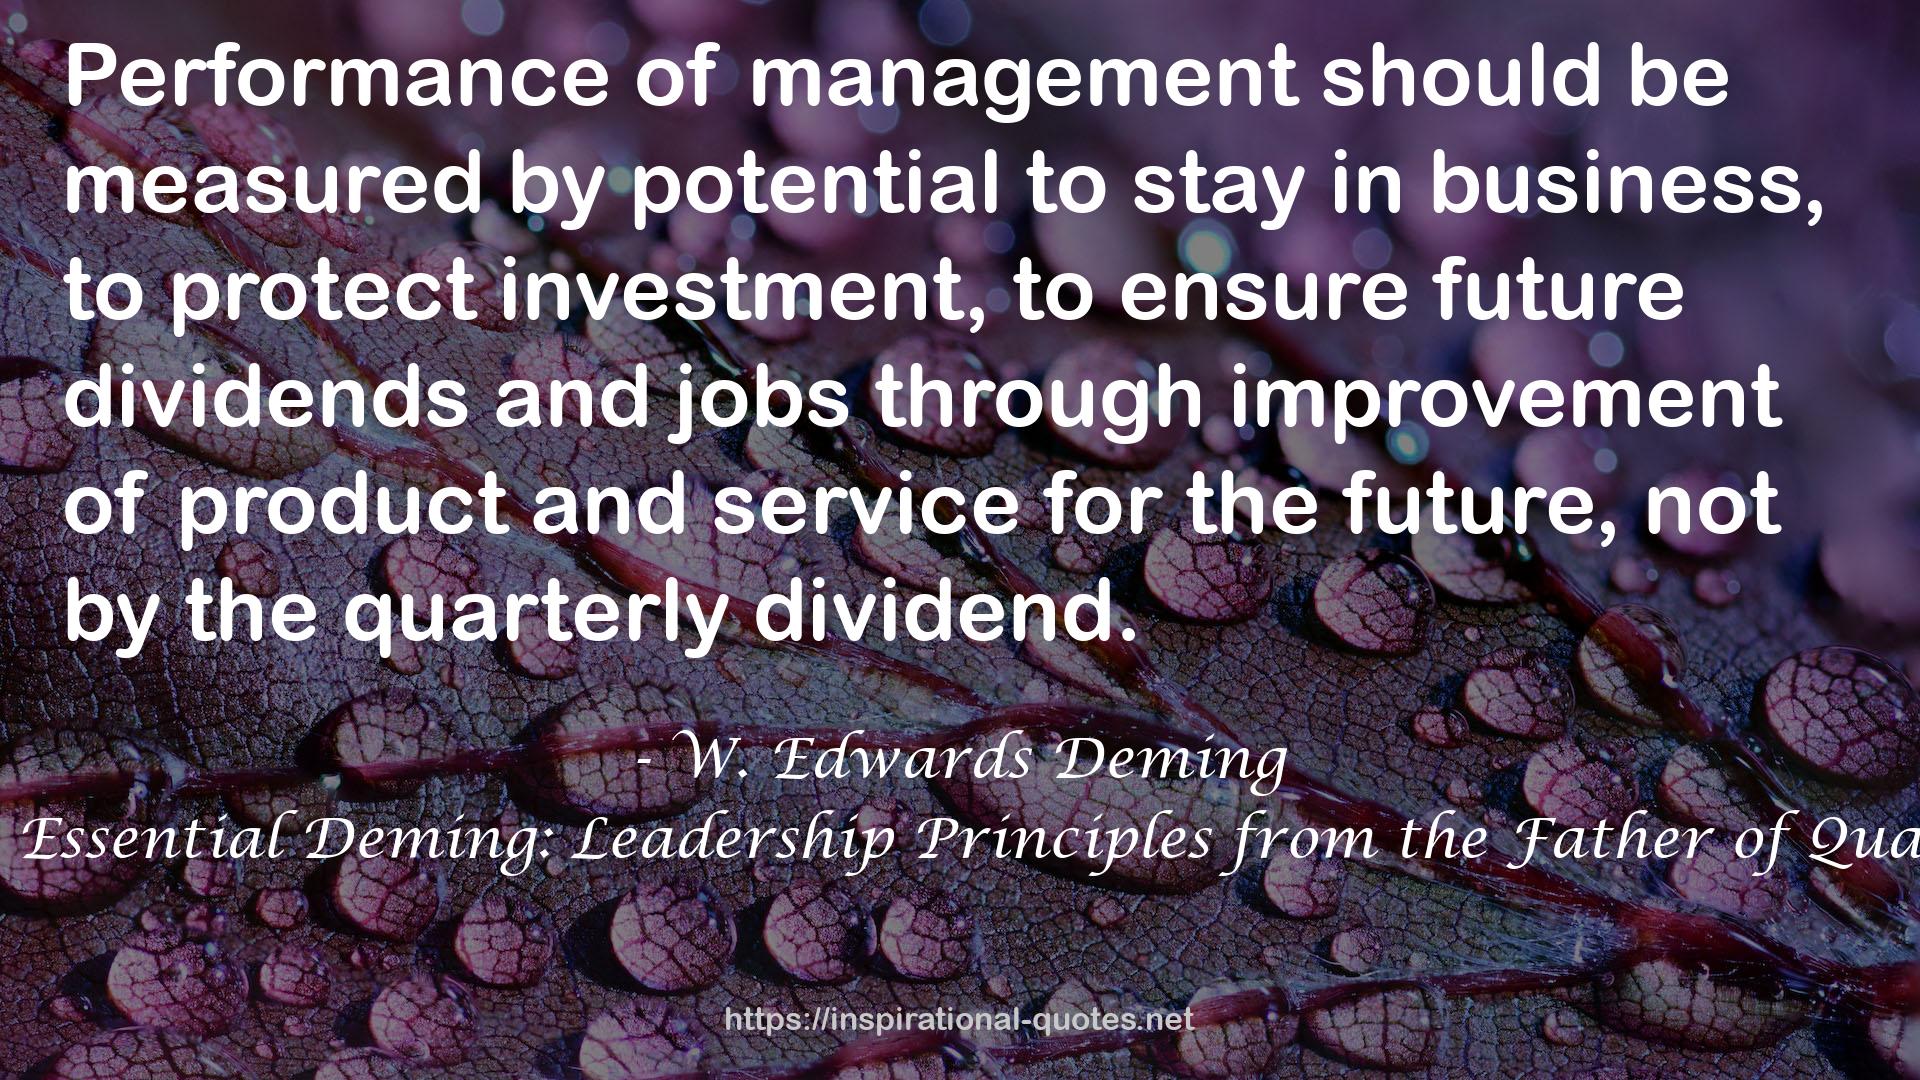 The Essential Deming: Leadership Principles from the Father of Quality QUOTES